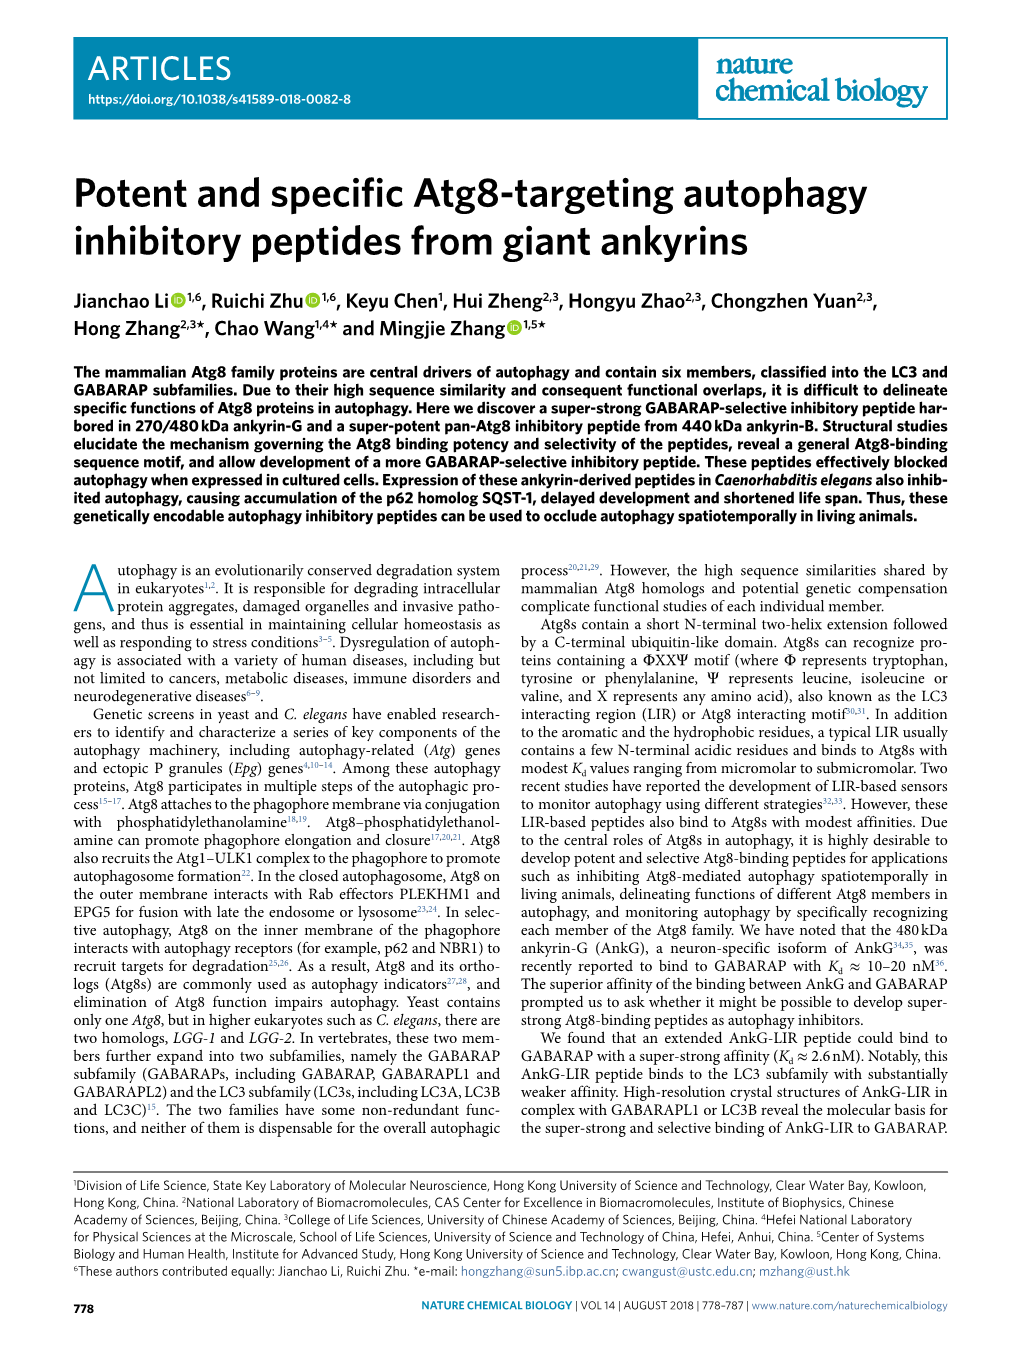 Potent and Specific Atg8-Targeting Autophagy Inhibitory Peptides from Giant Ankyrins